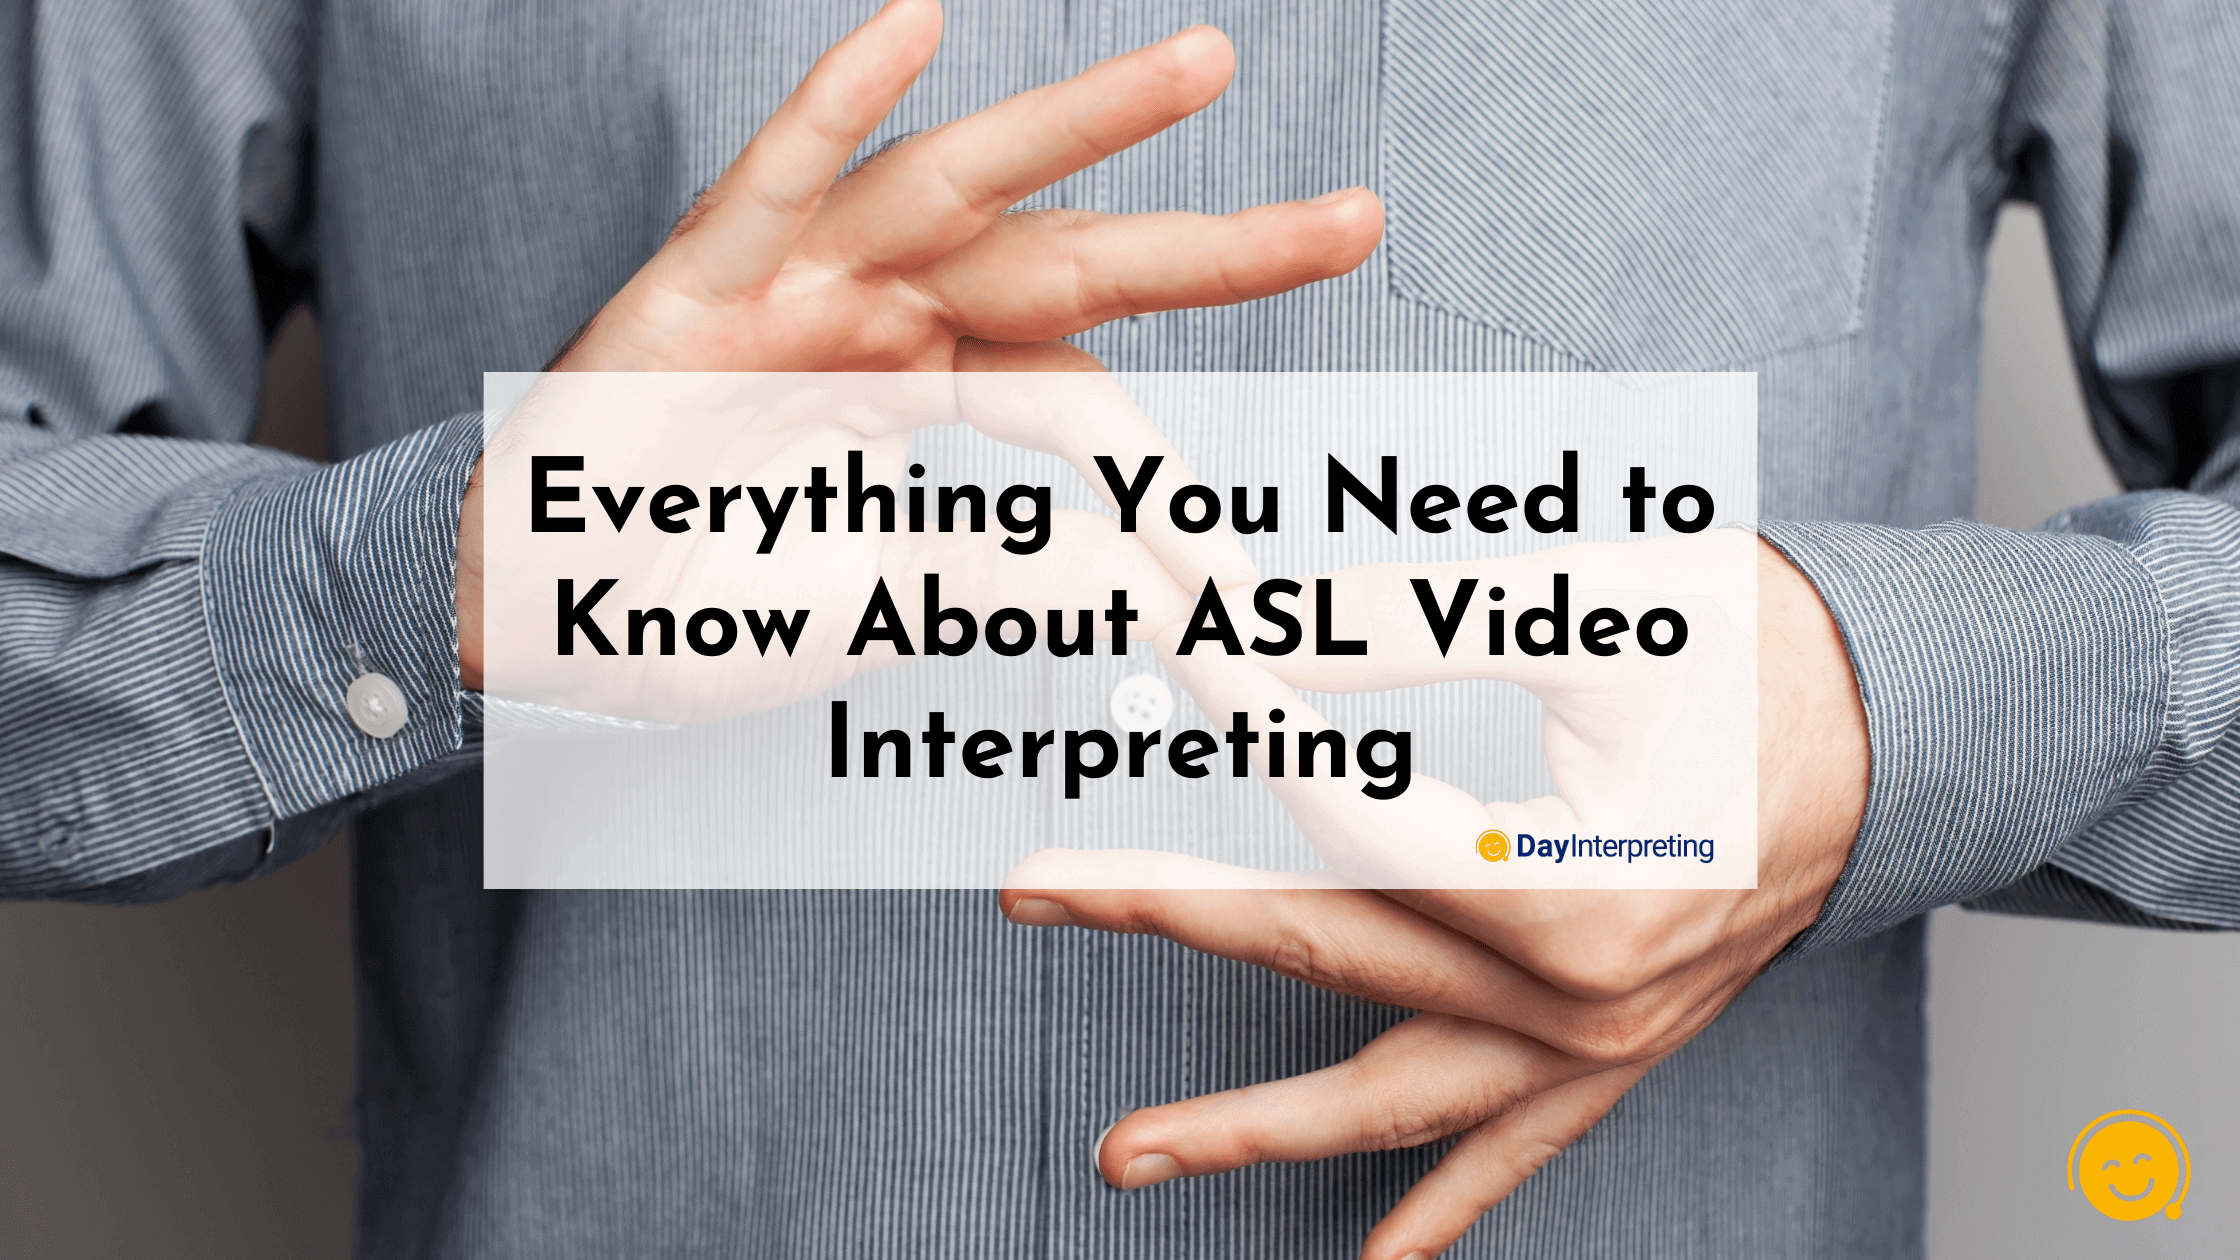 Everything You Need to Know About ASL Video Interpreting